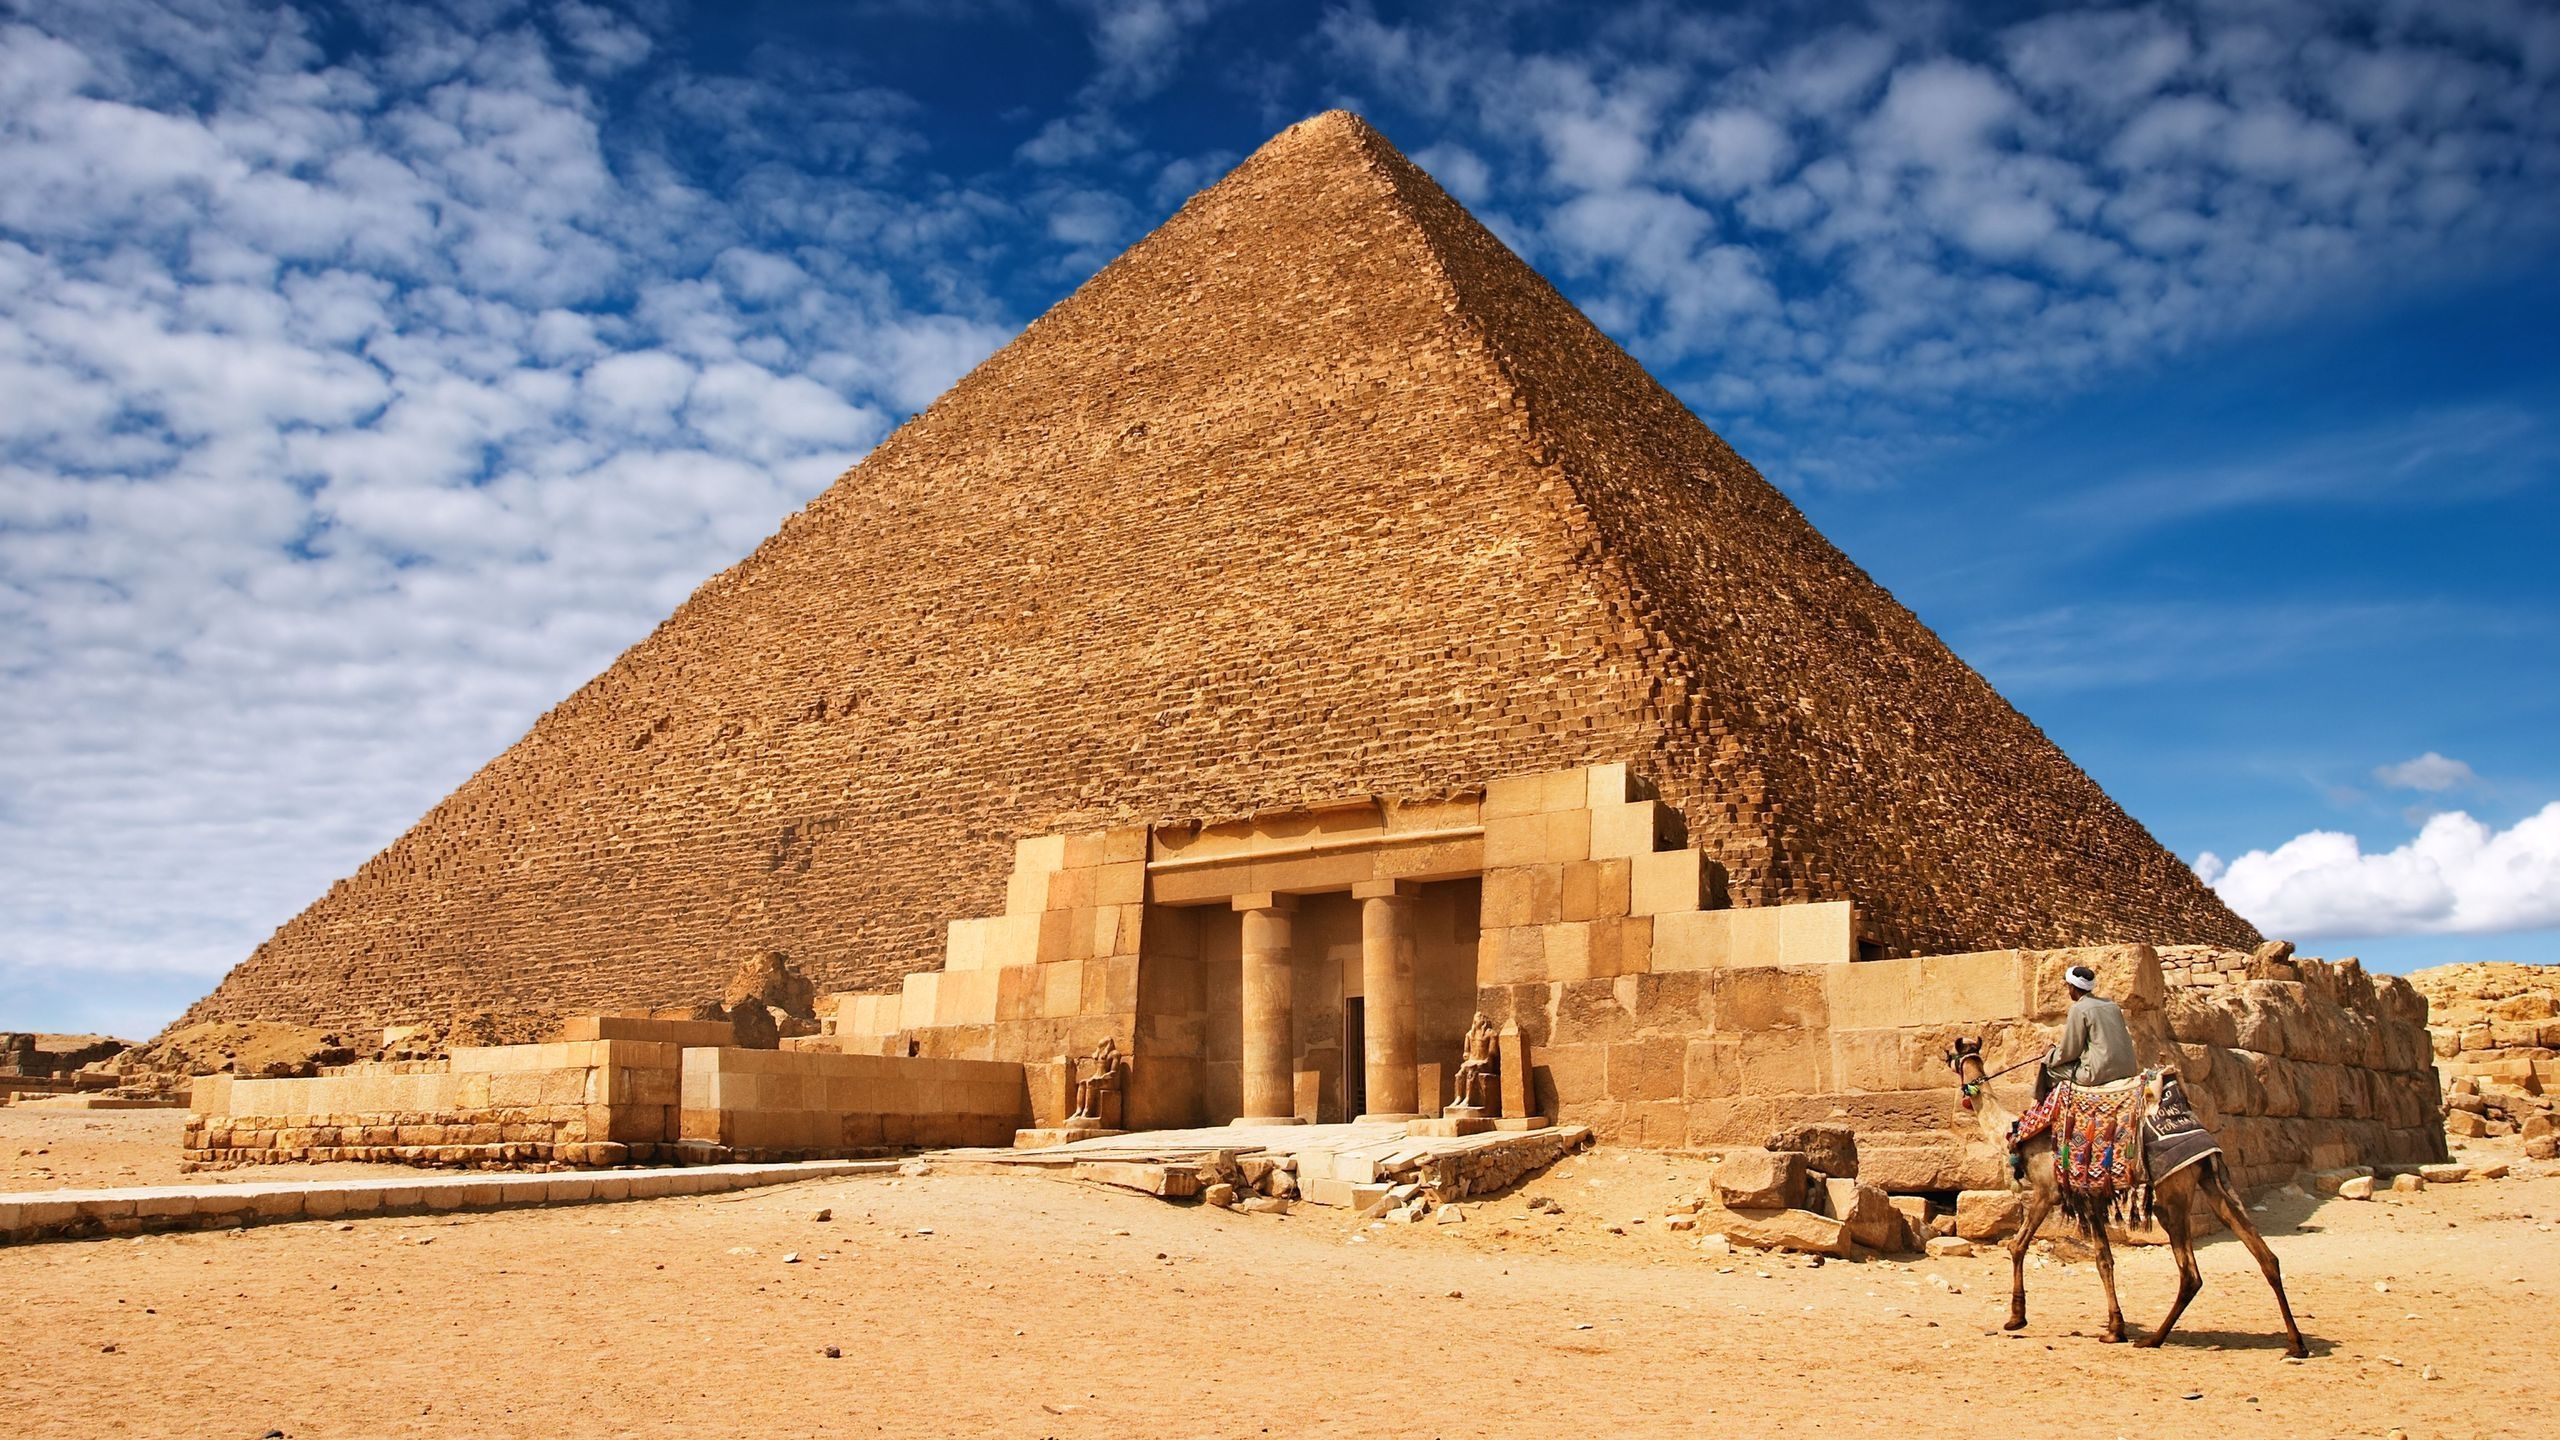 The Egyptian Pyramids for 2560x1440 HDTV resolution